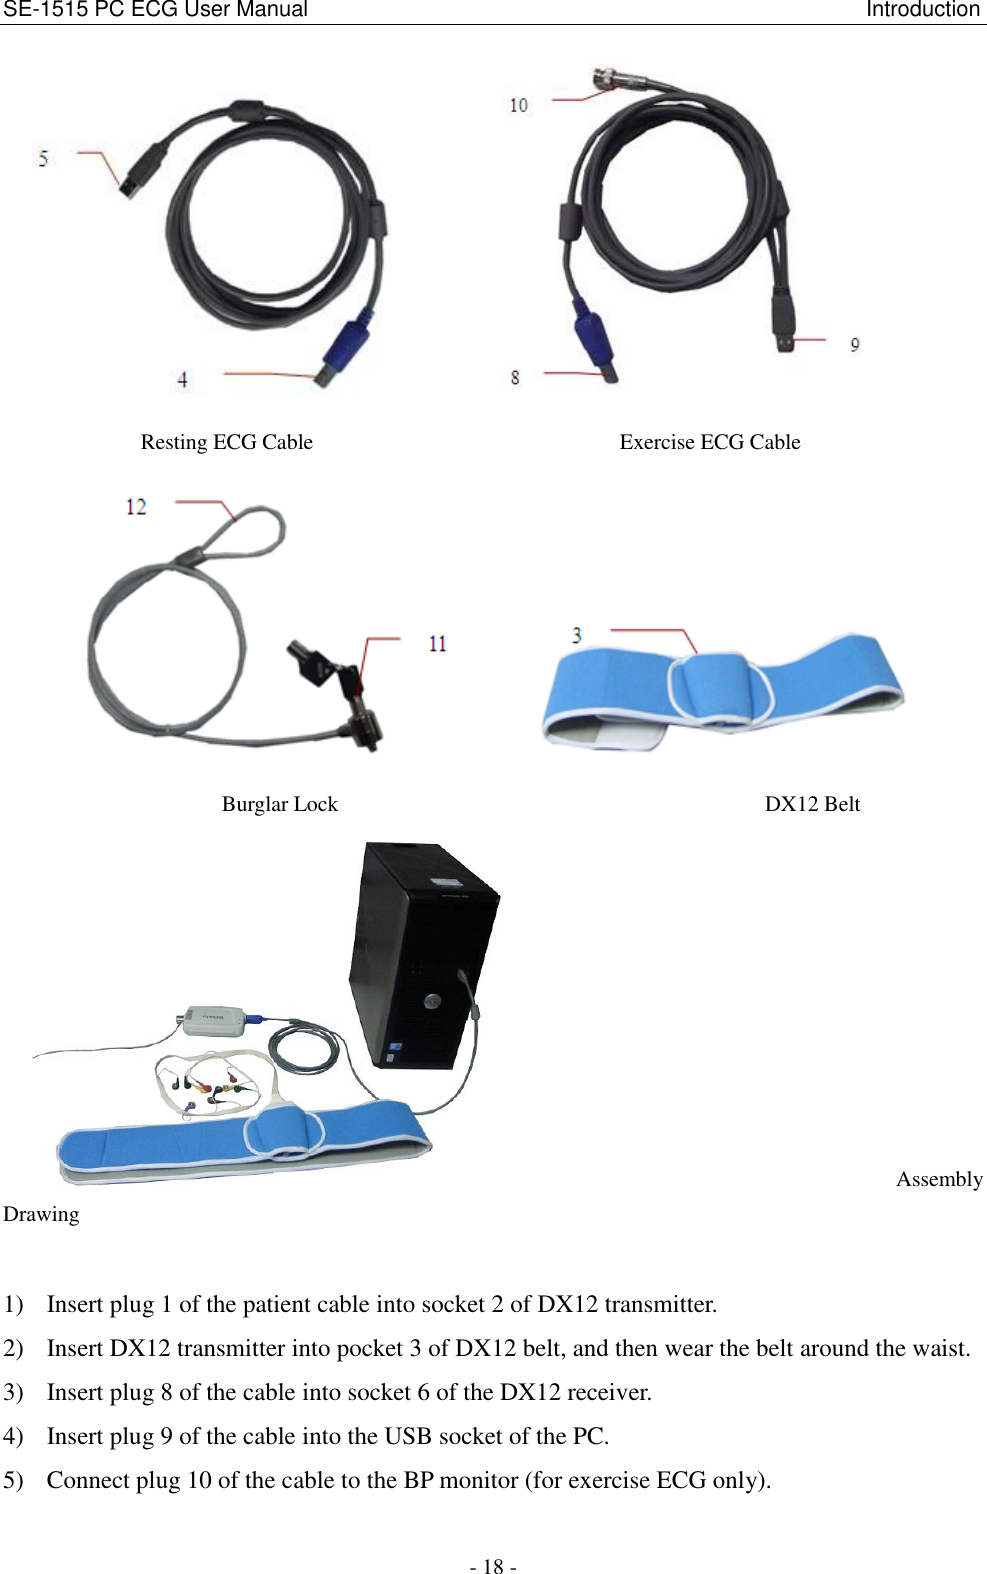 SE-1515 PC ECG User Manual                                                                                                   Introduction - 18 -             Resting ECG Cable                                                        Exercise ECG Cable                   Burglar Lock                                                                              DX12 Belt   Assembly Drawing 1) Insert plug 1 of the patient cable into socket 2 of DX12 transmitter. 2) Insert DX12 transmitter into pocket 3 of DX12 belt, and then wear the belt around the waist. 3) Insert plug 8 of the cable into socket 6 of the DX12 receiver. 4) Insert plug 9 of the cable into the USB socket of the PC. 5) Connect plug 10 of the cable to the BP monitor (for exercise ECG only). 